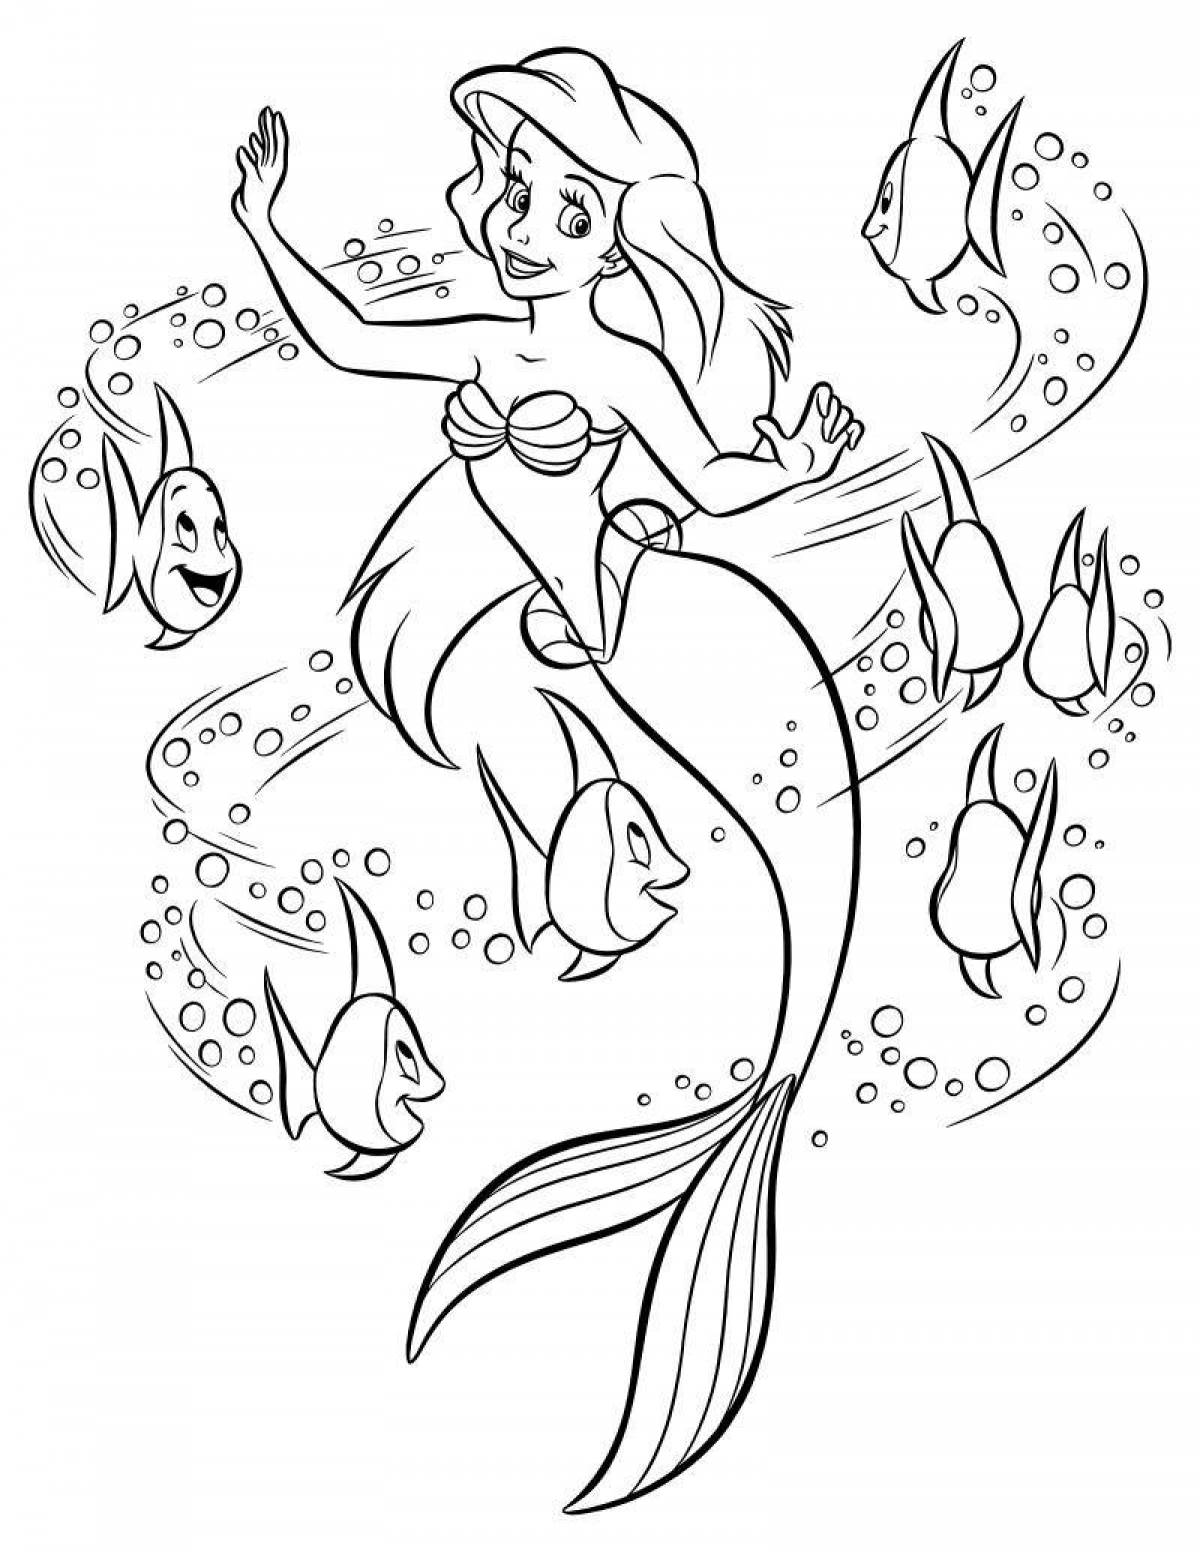 Animated mermaid coloring book for children 3-4 years old